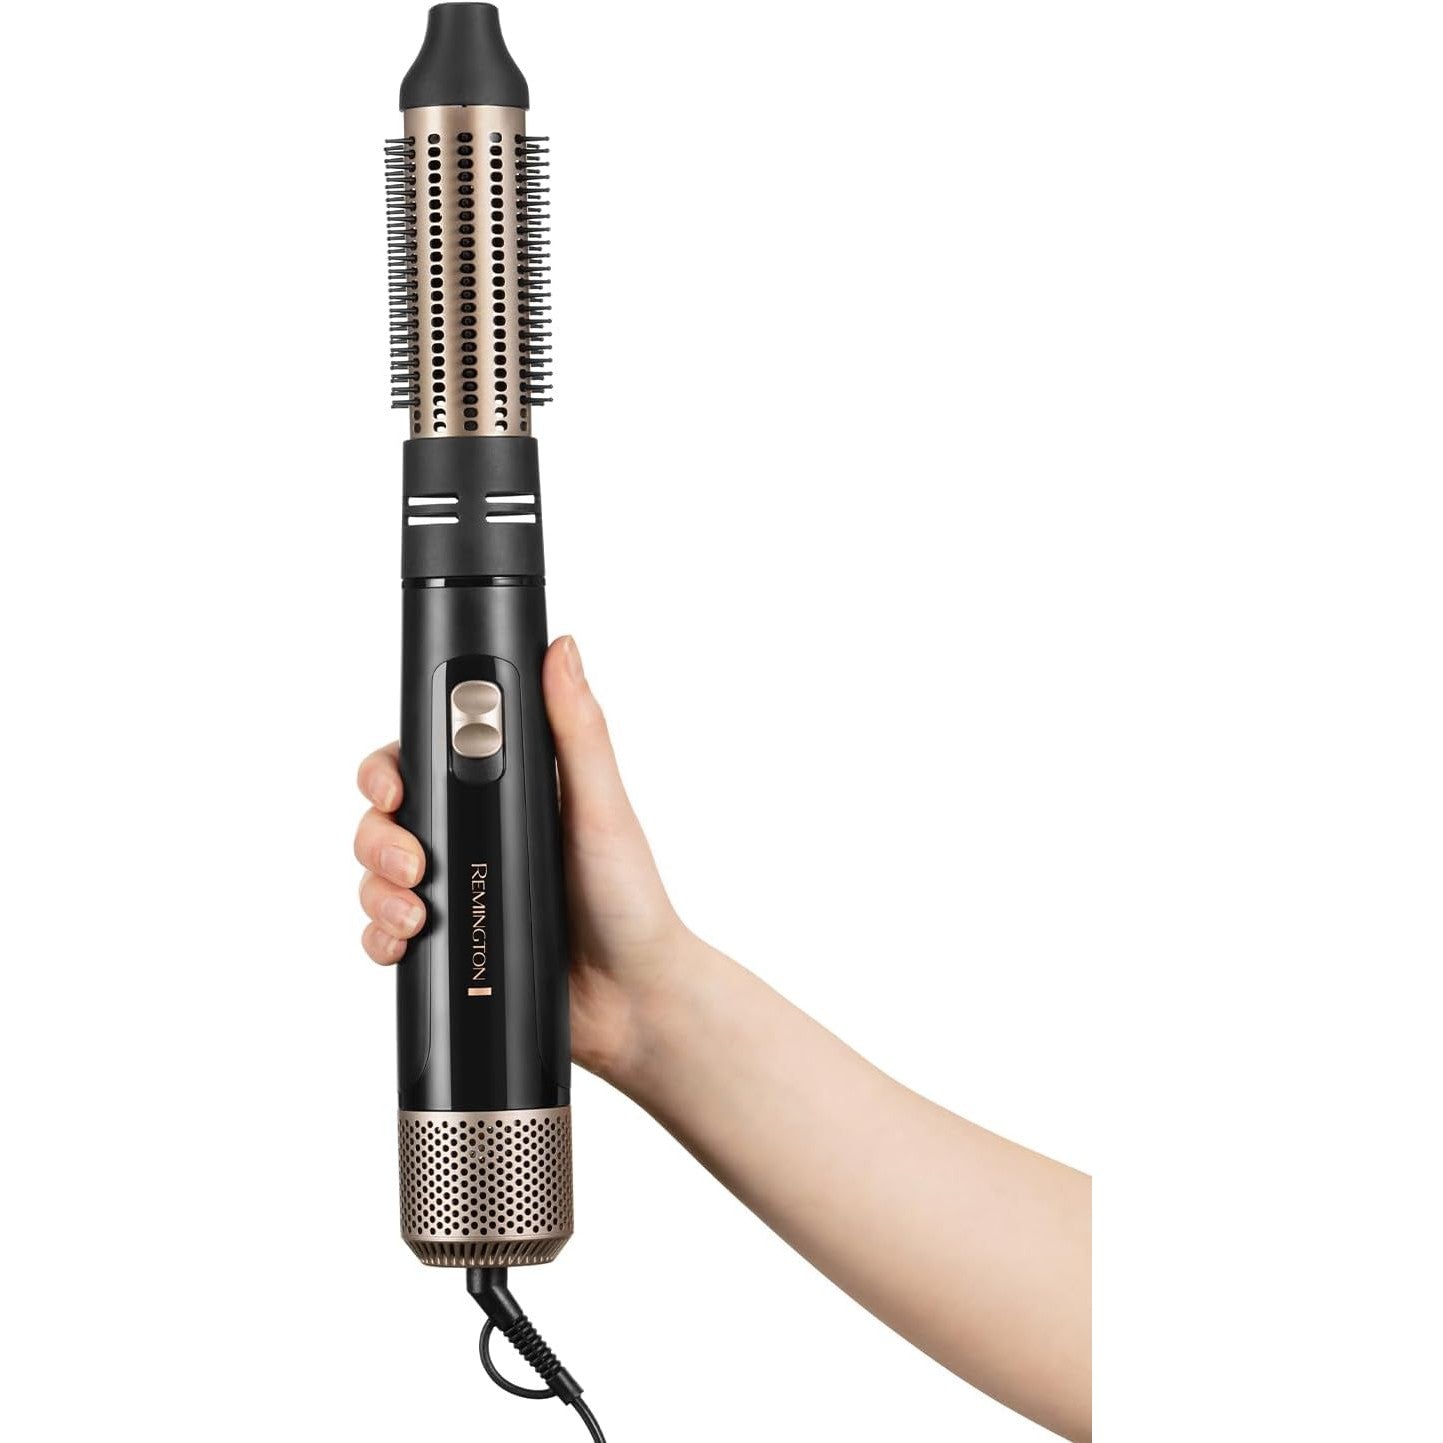 Remington Blow Dry & Style Air Styler - Hair Dryer, Hot Brush and Hair Curler for Mid to Long Length Hair, 4 Attachments, 1000 Watts, AS7500 - Black